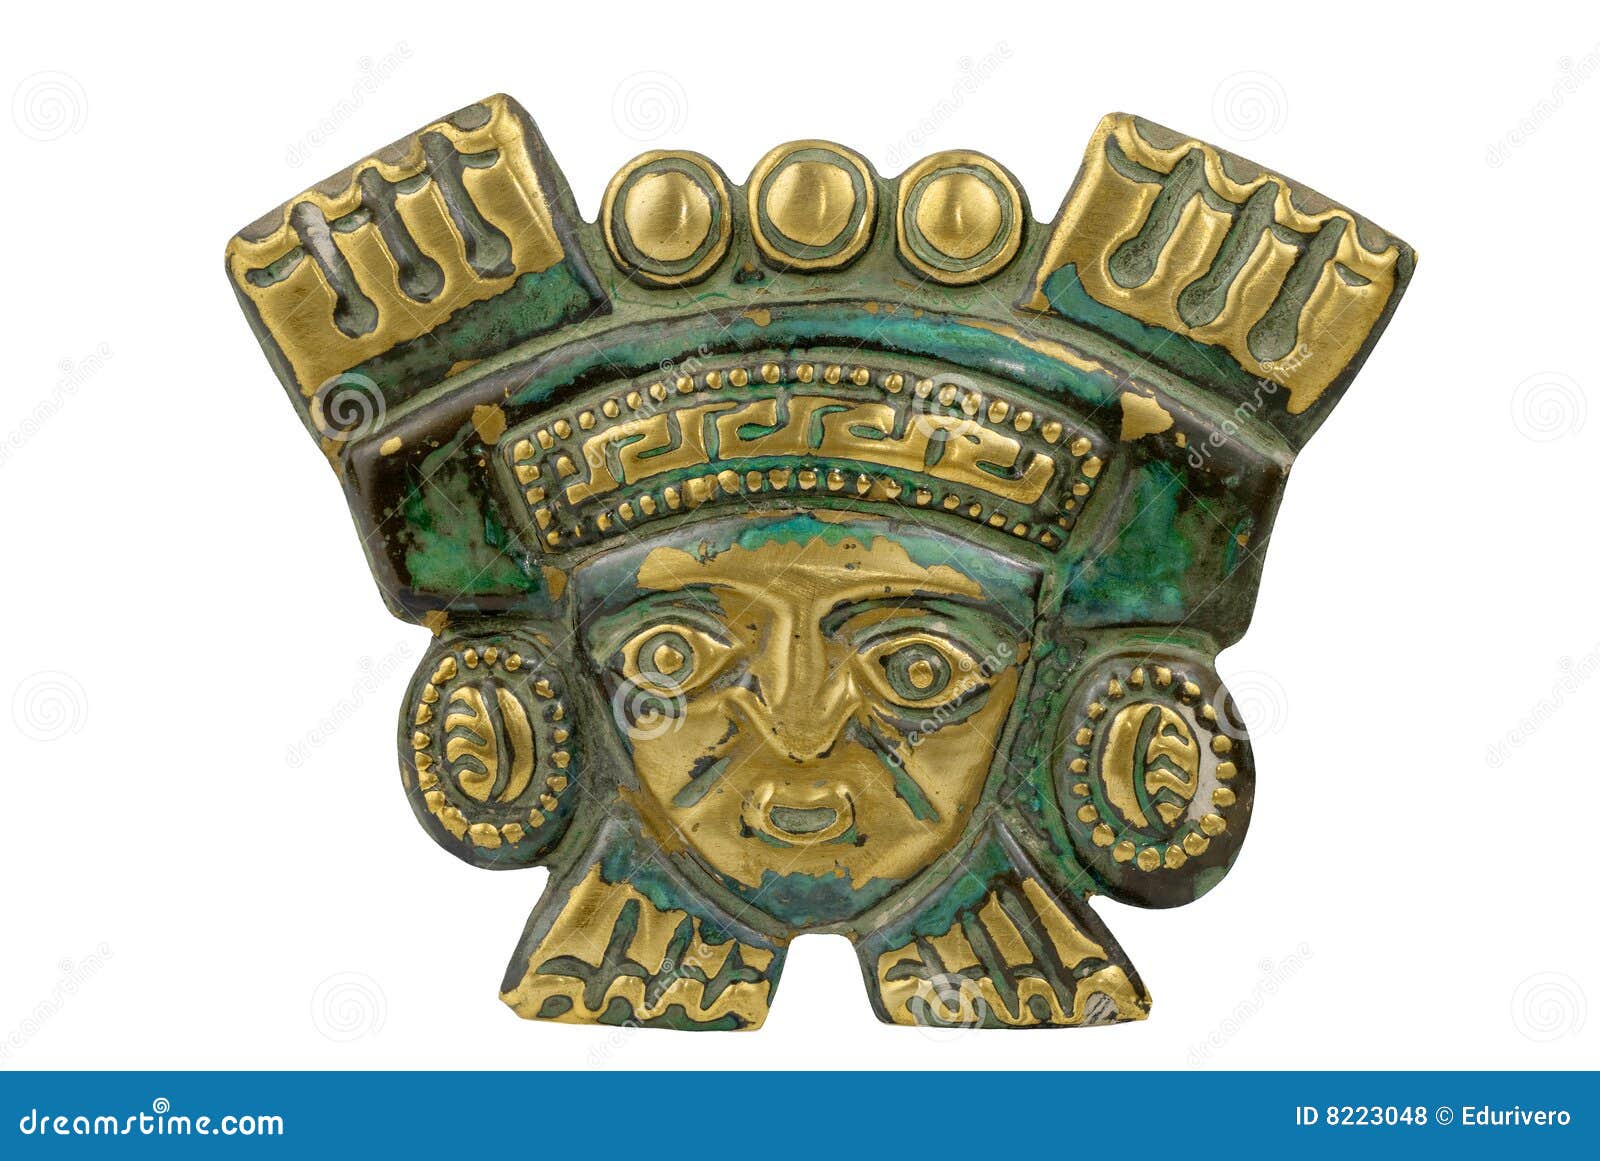 peruvian ancient ceremonial mask  on white